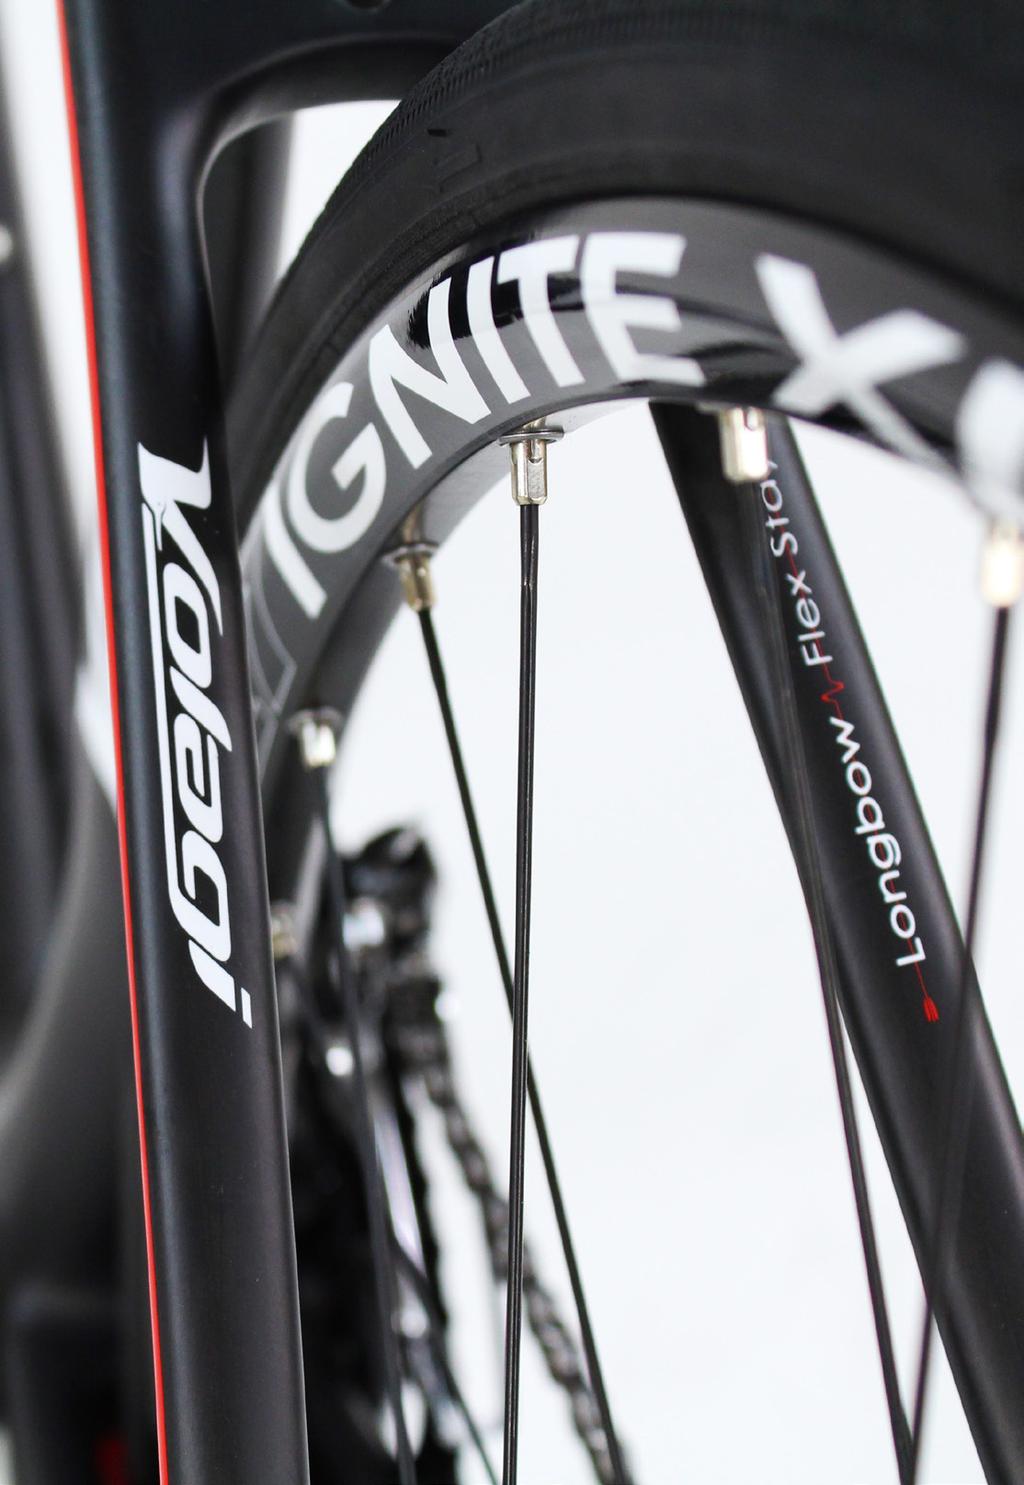 47cm frame size for riders looking for a high performance bike in a smaller package.